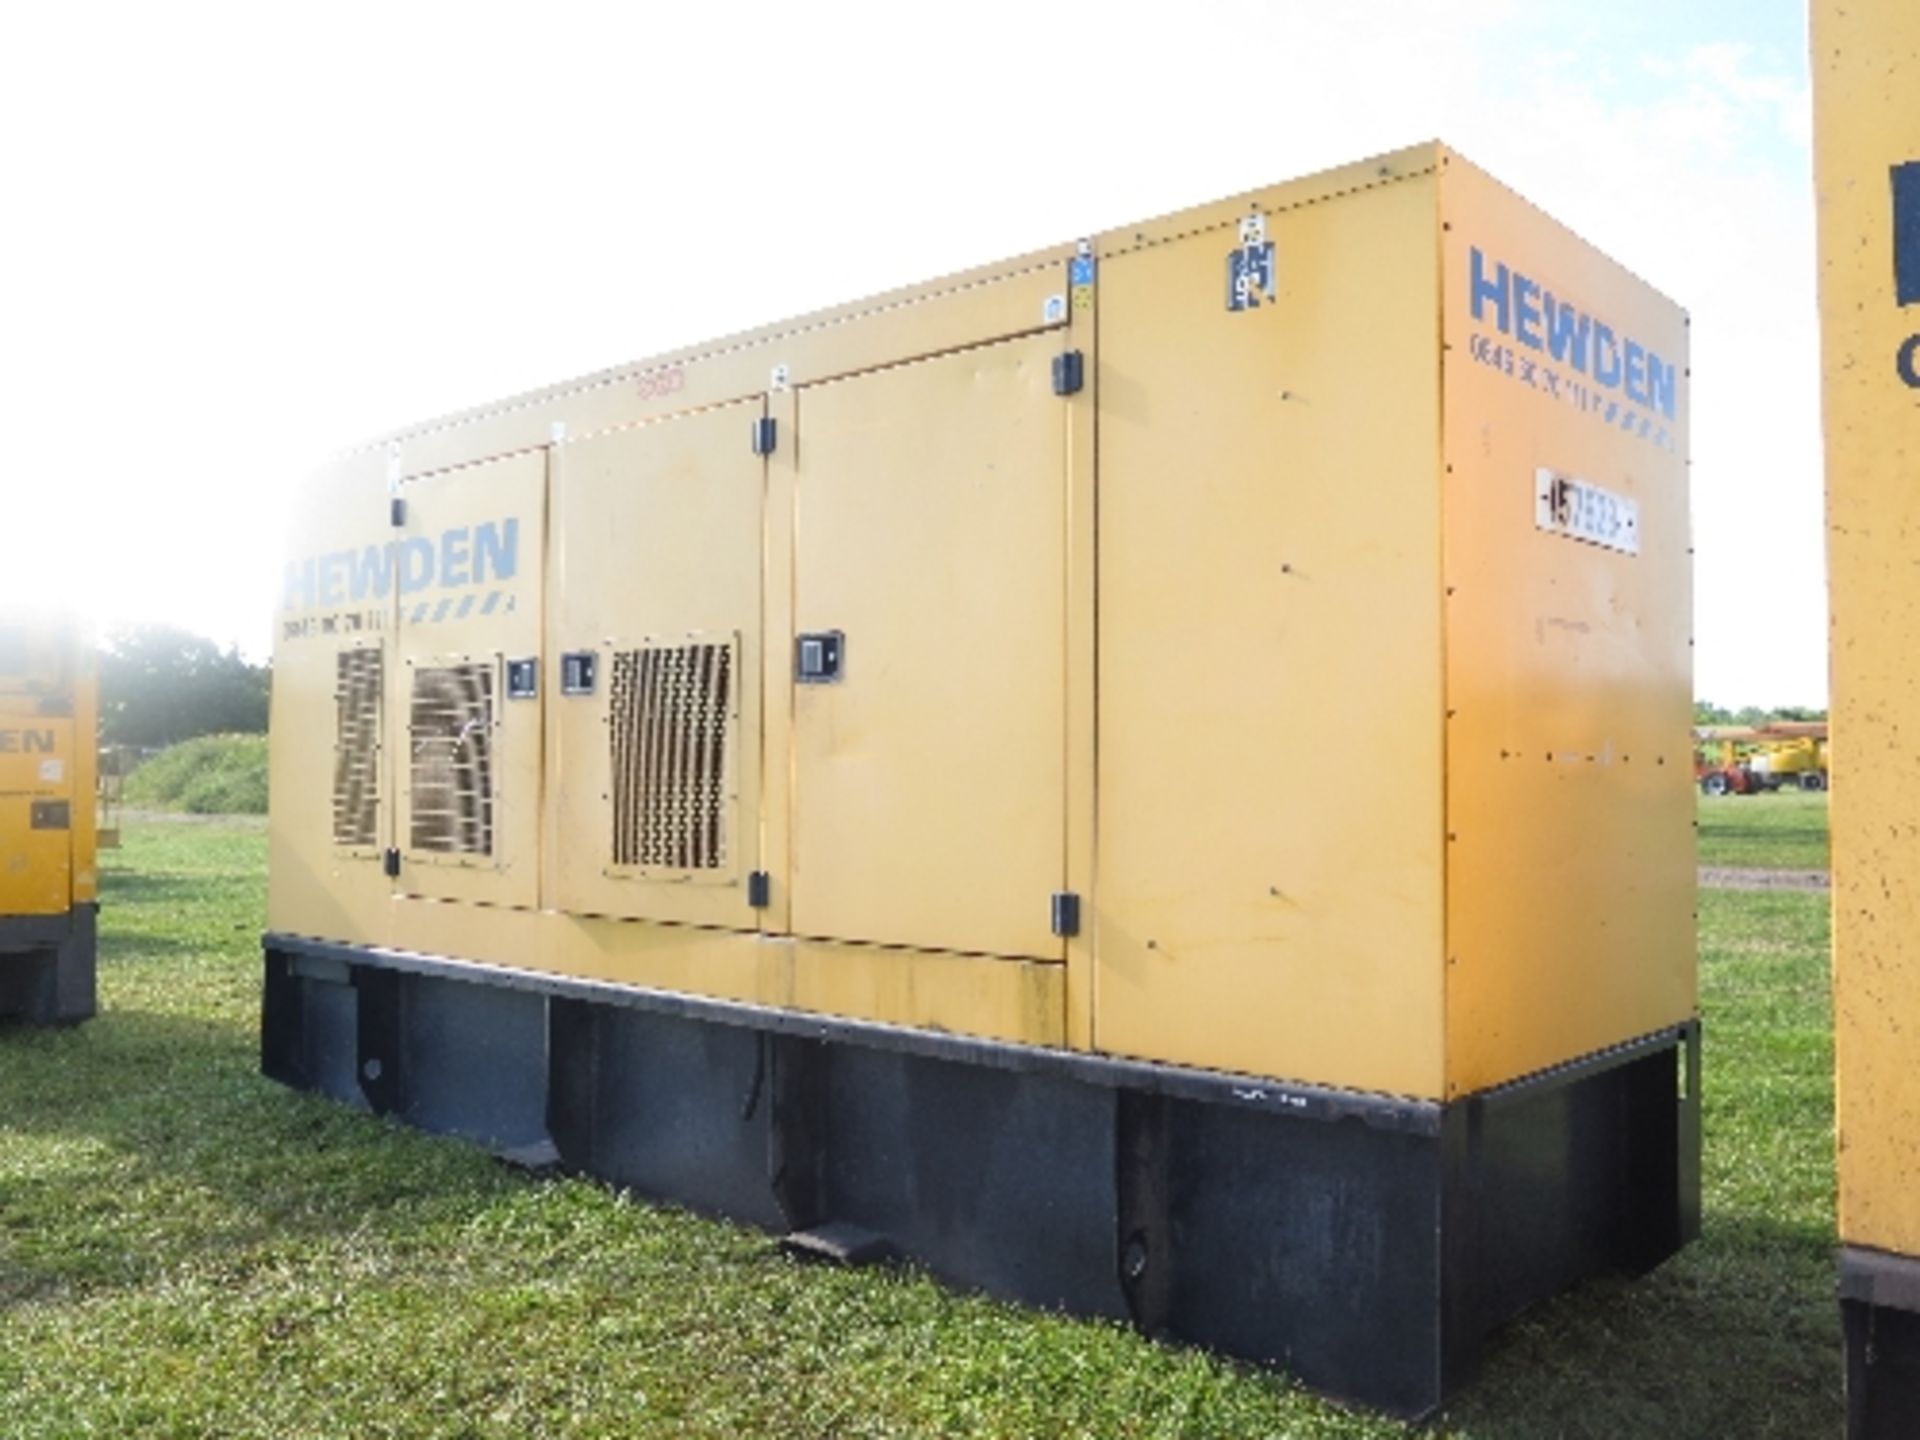 Caterpillar XQE200 generator 22896 hrs 157829
PERKINS - RUNS AND MAKES POWER
ALL LOTS are SOLD